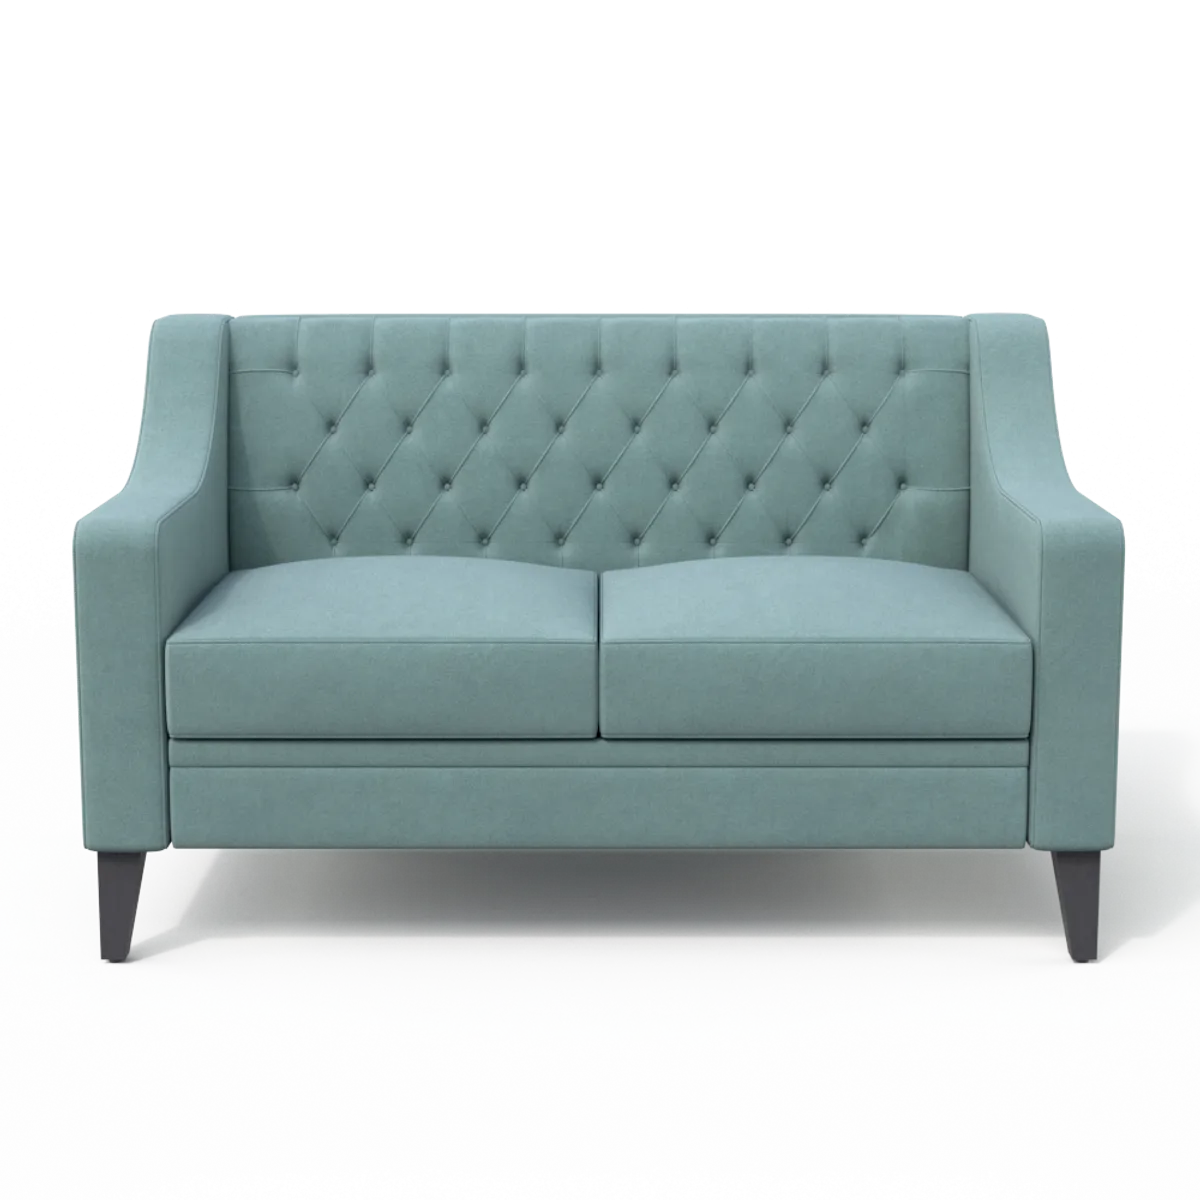 Lobby 1 Sofa 1 By Inside Out Contracts